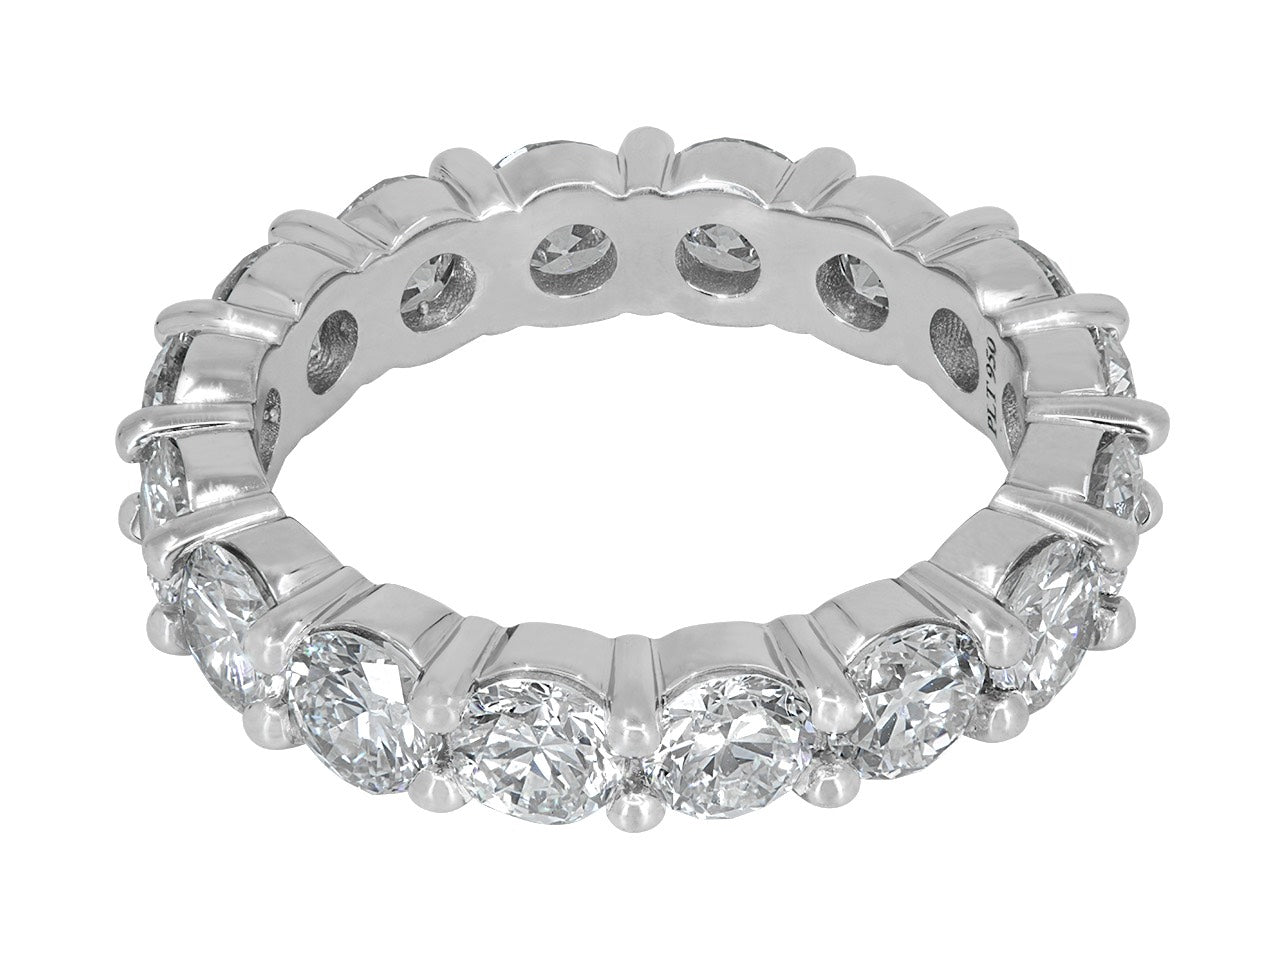 Transitional-cut Diamond Eternity Band, 3.93 total carats, in Platinum